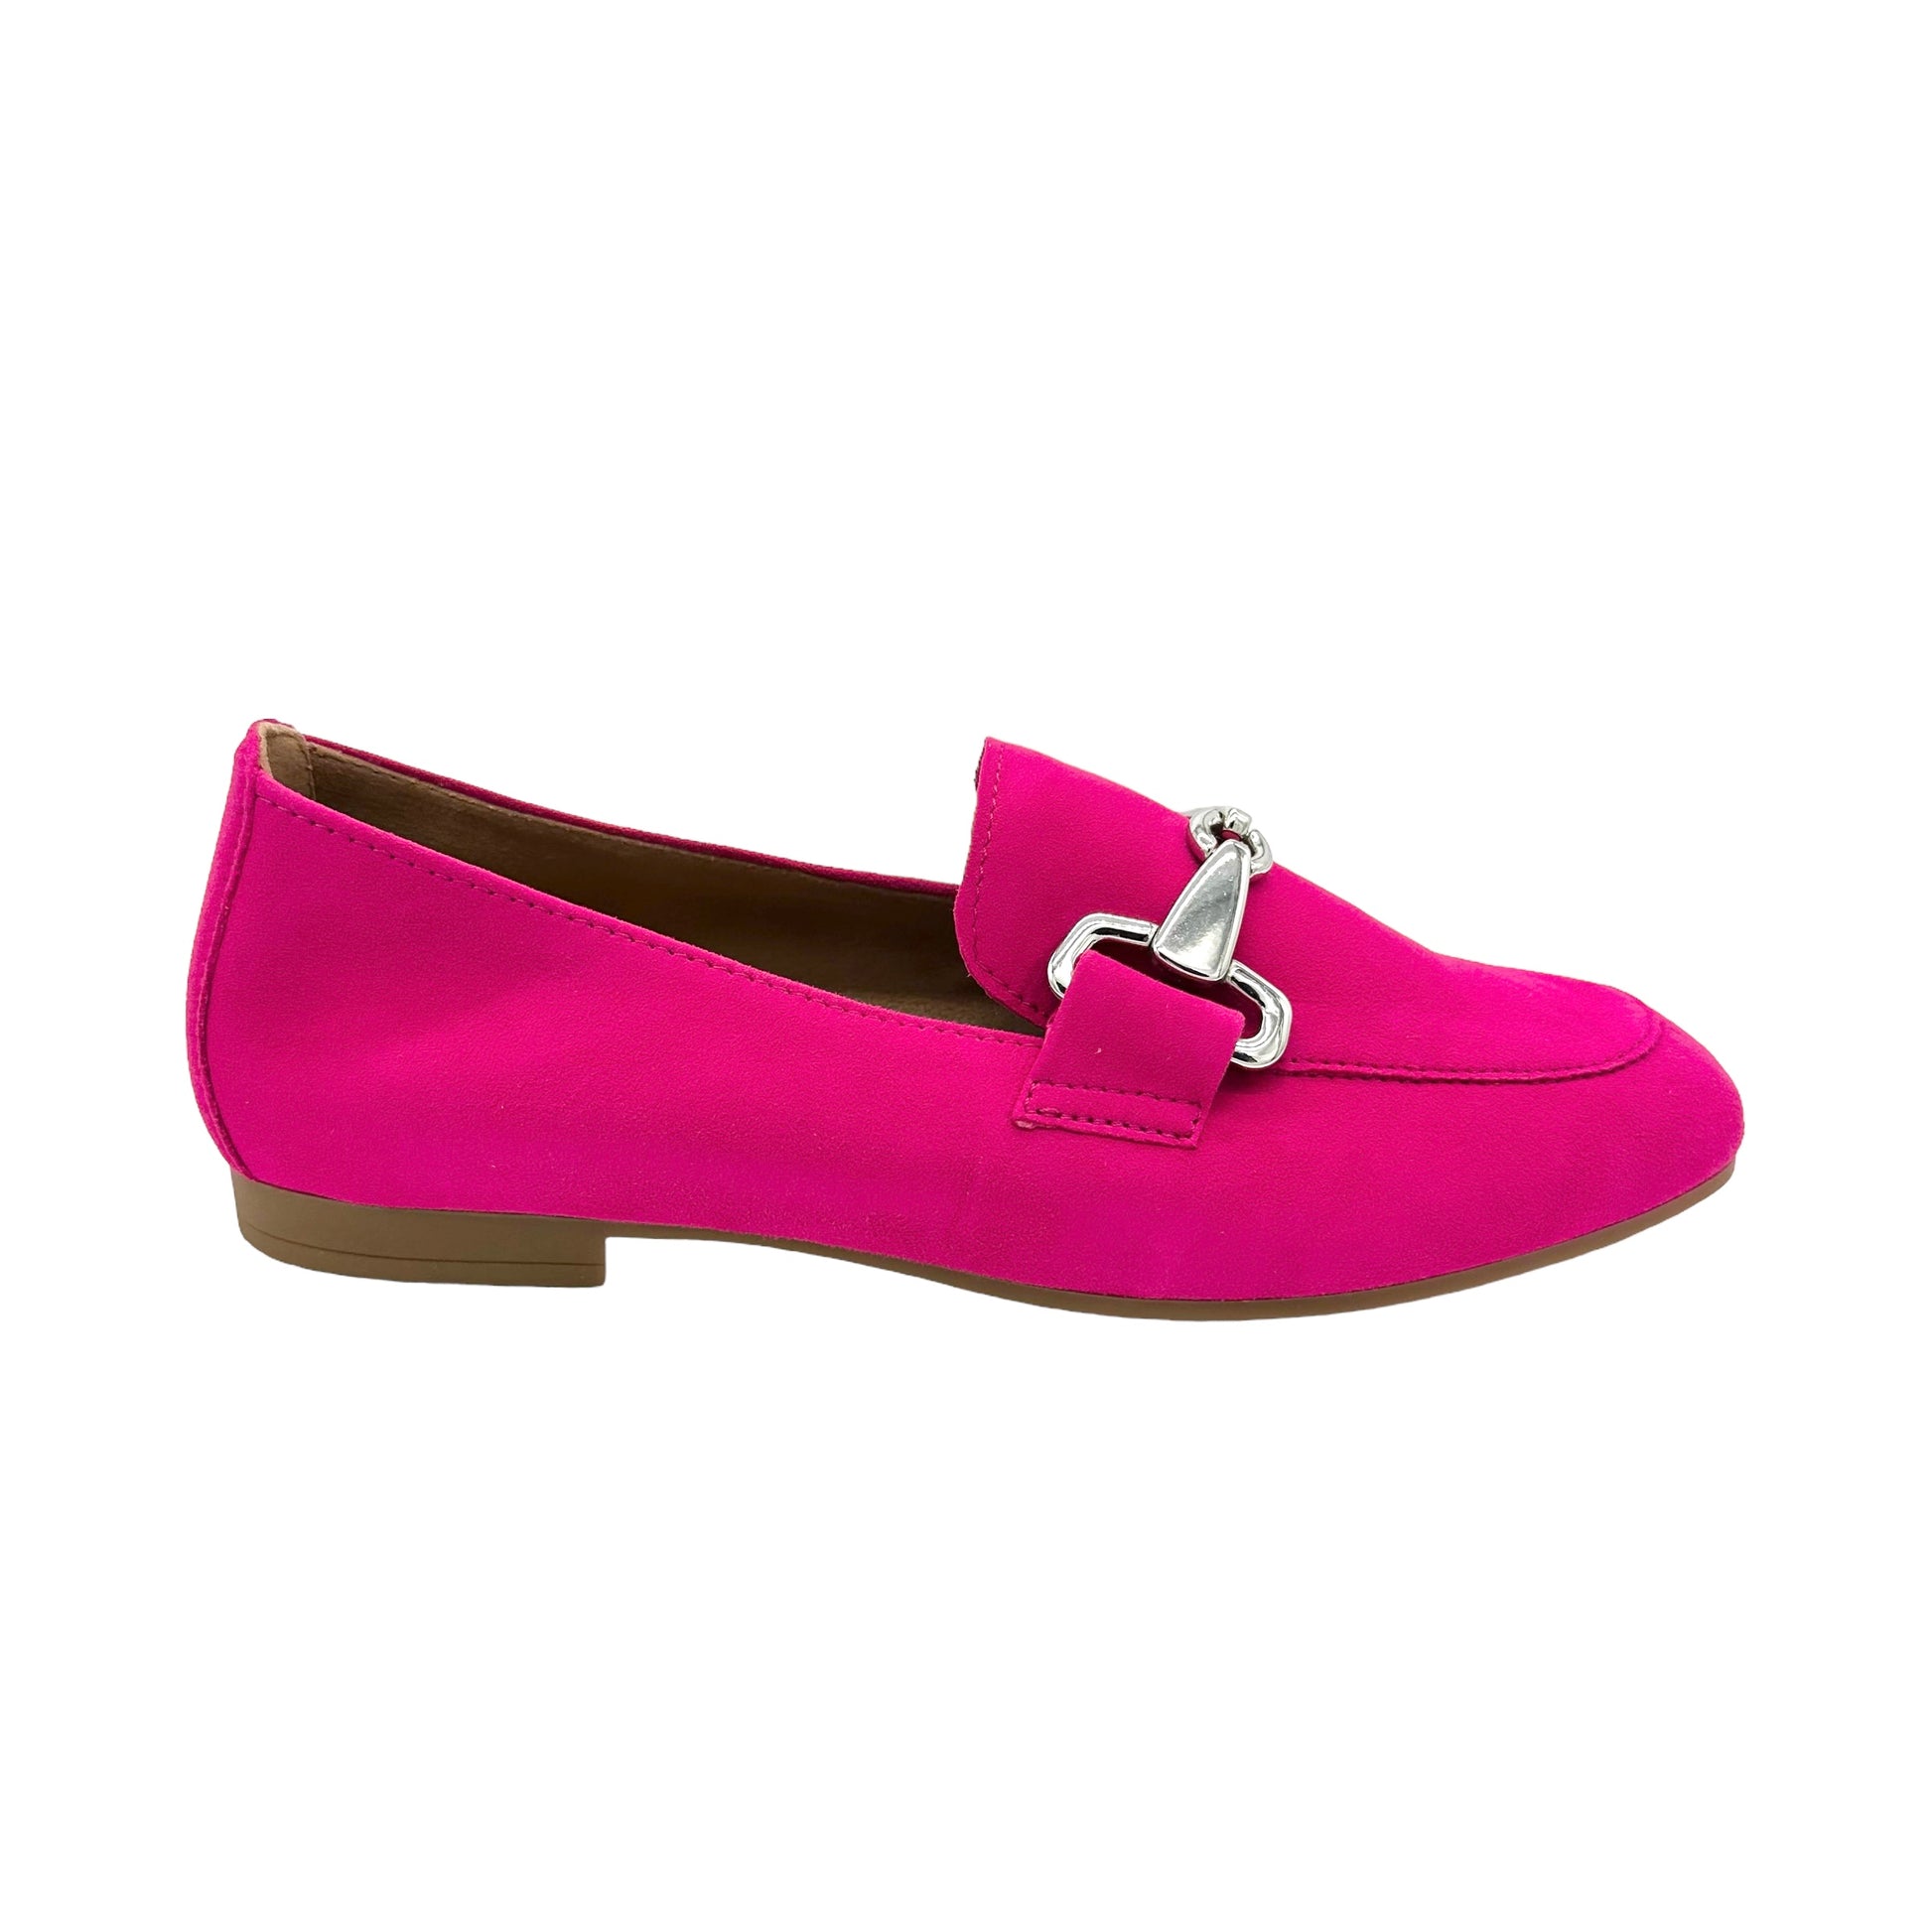 Gabor Jangle 25.211 soft summer suede loafers in fuchsia pink suede ...